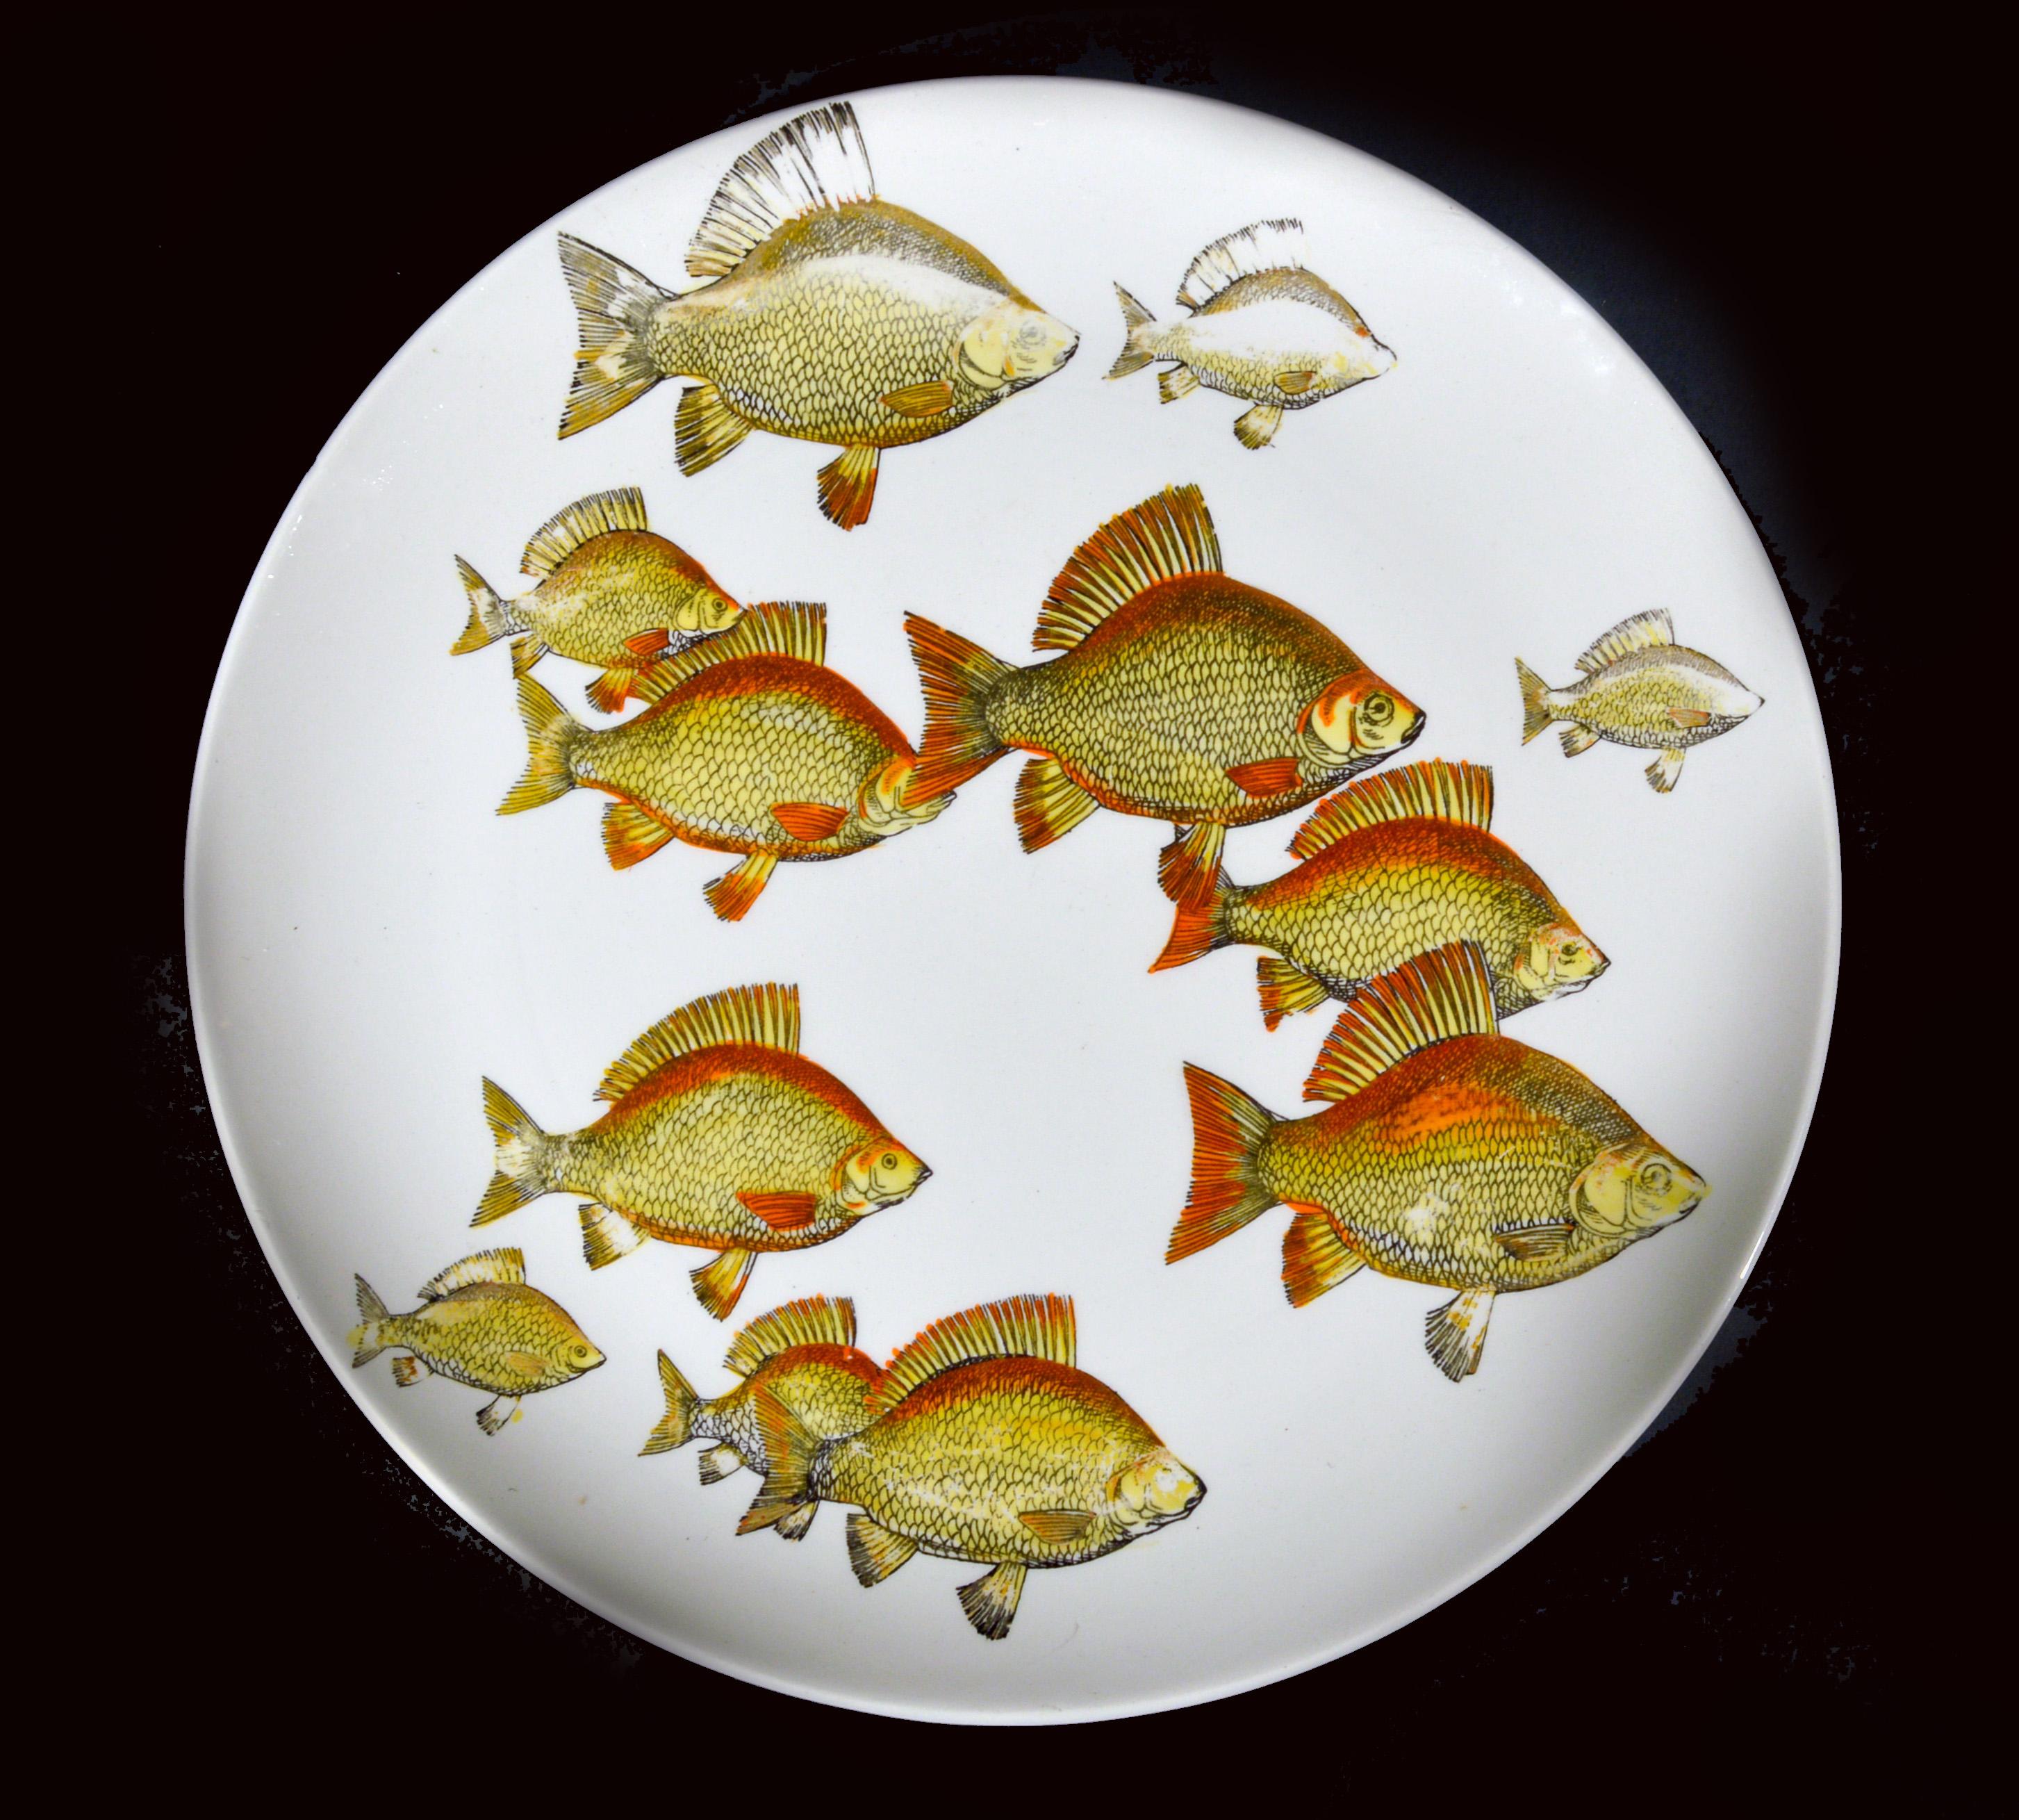 Mid-Century Modern Piero Fornasetti Porcelain Fish Plates, Pesci pattern or Passage of Fish For Sale